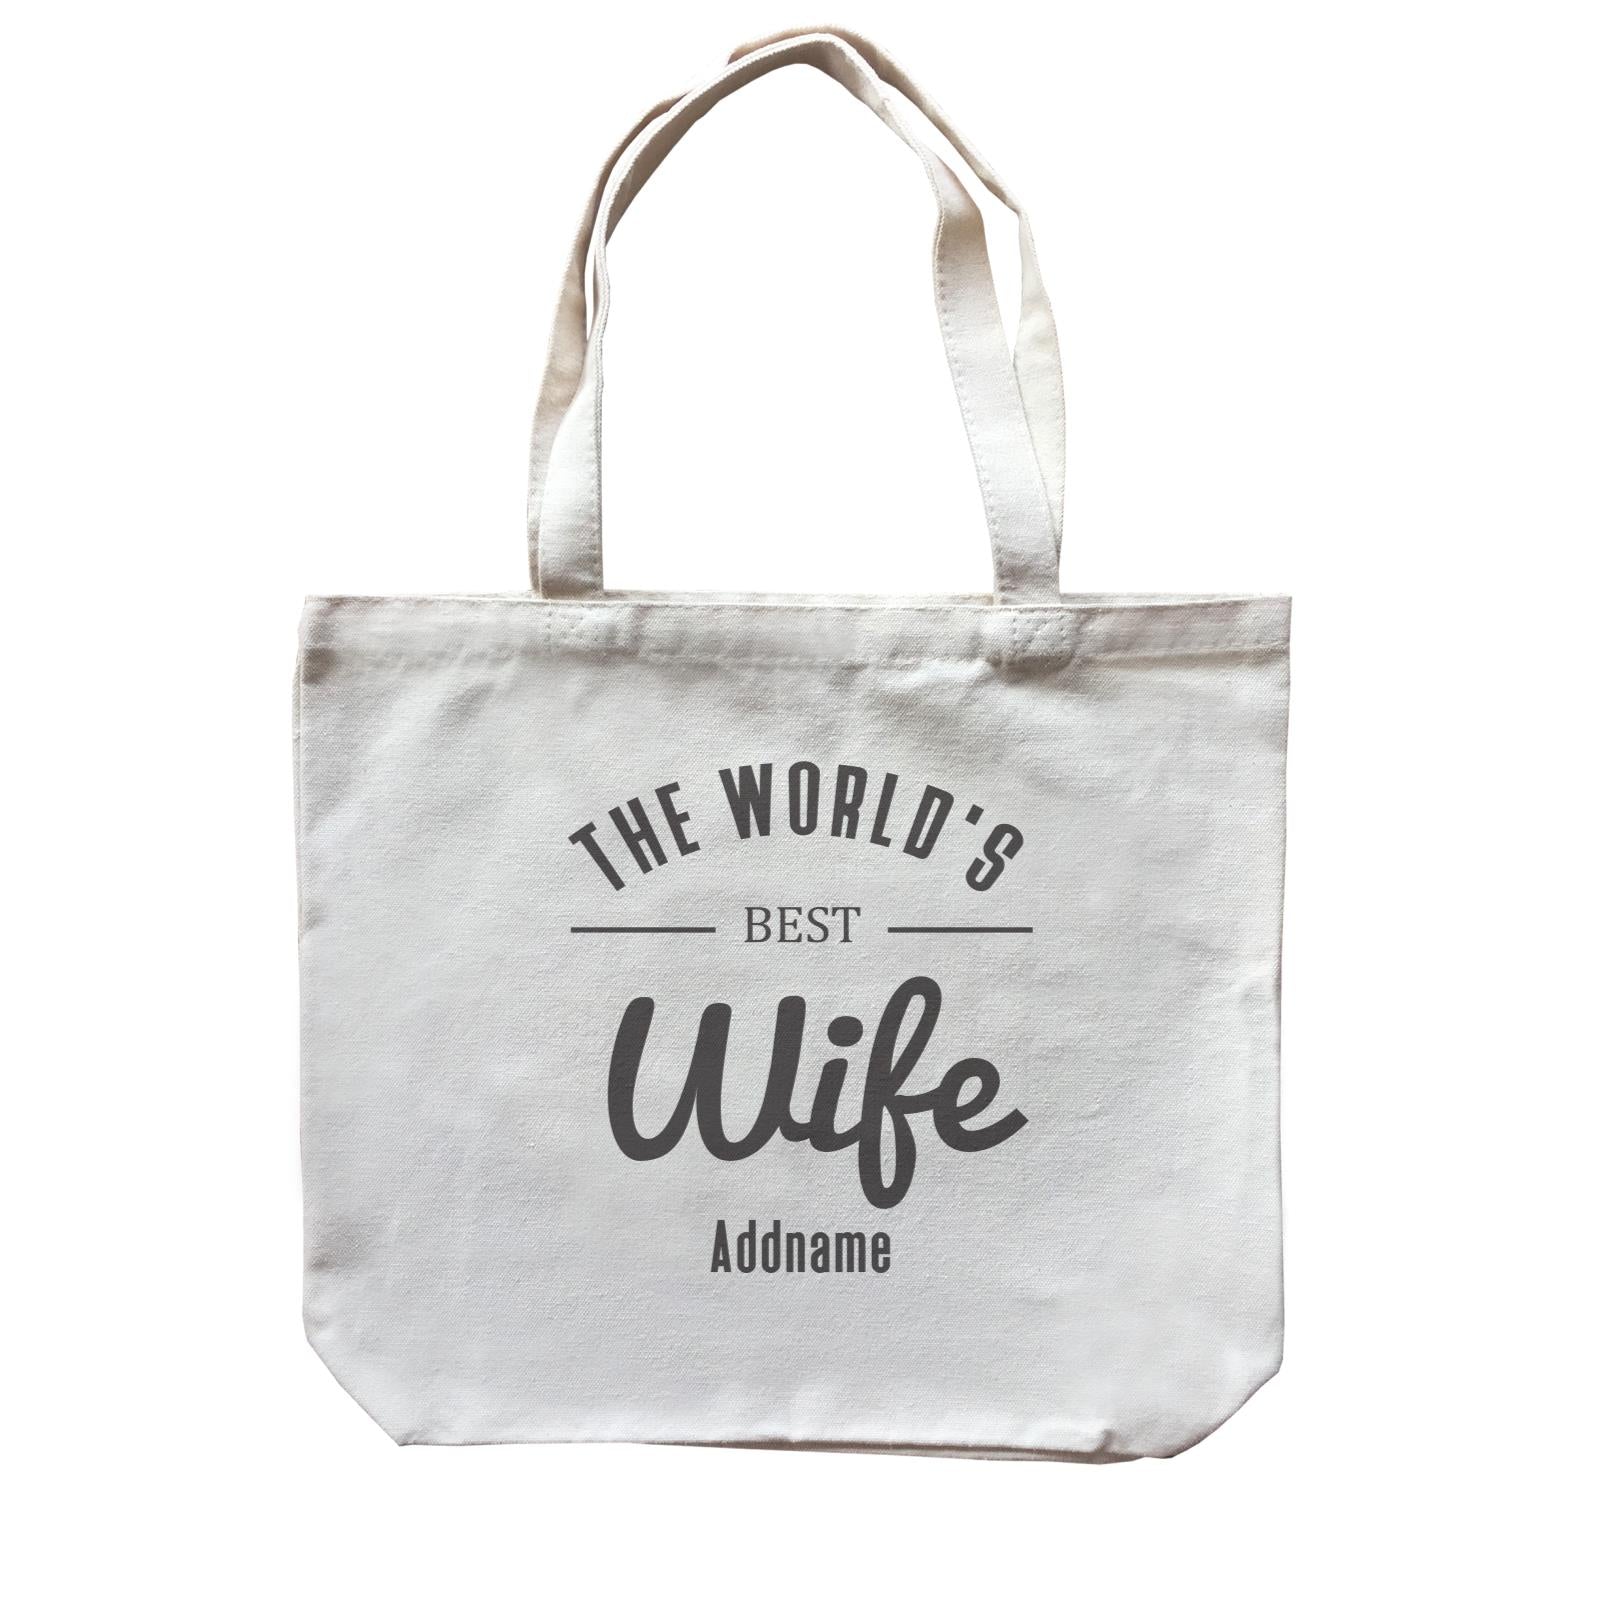 Husband and Wife The World's Best Wife Addname Canvas Bag